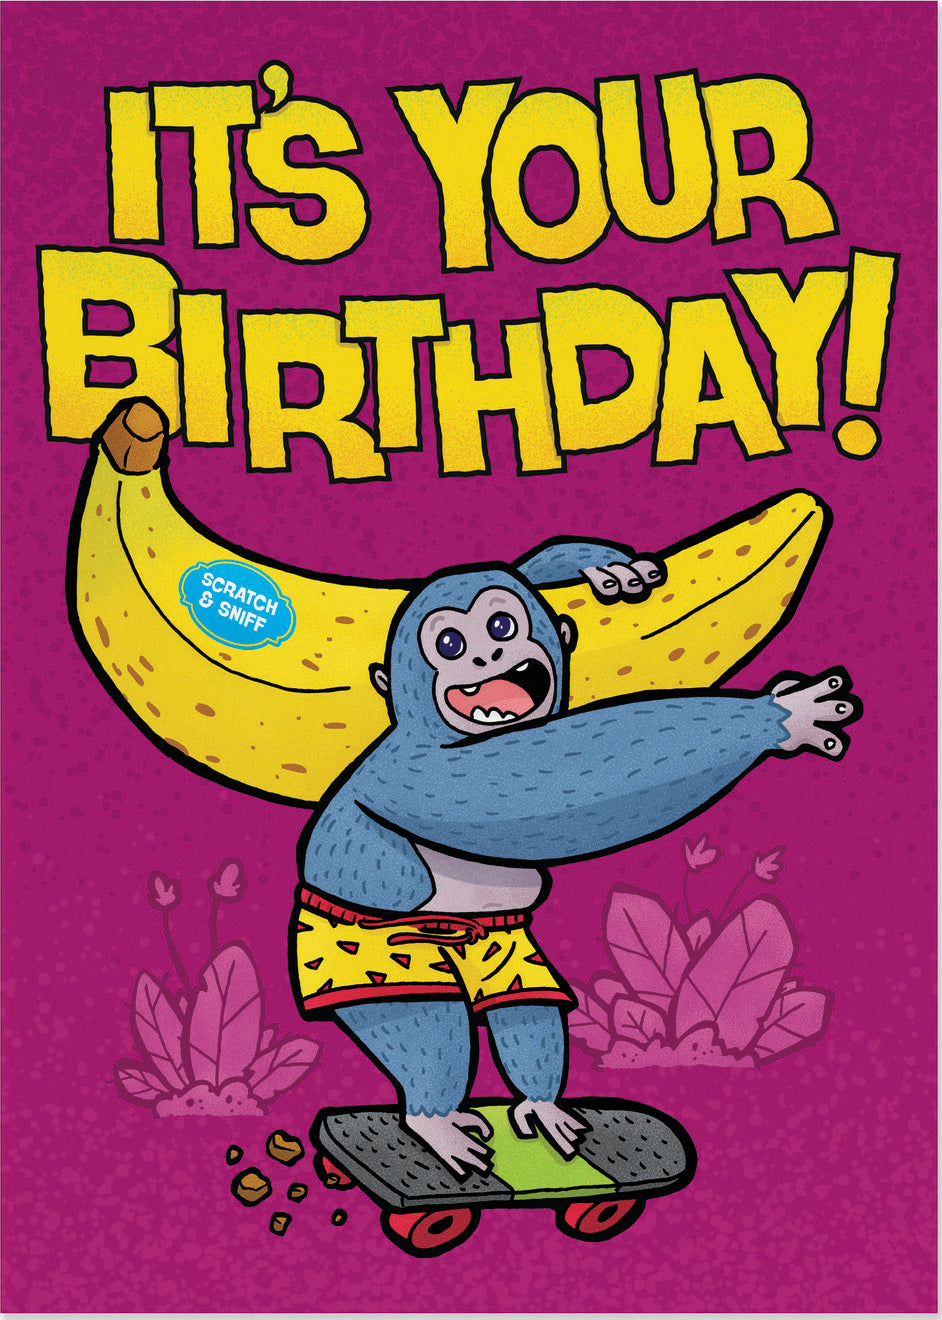 Monkey With Banana Scratch And Sniff Birthday Card by Peaceable Kingdom